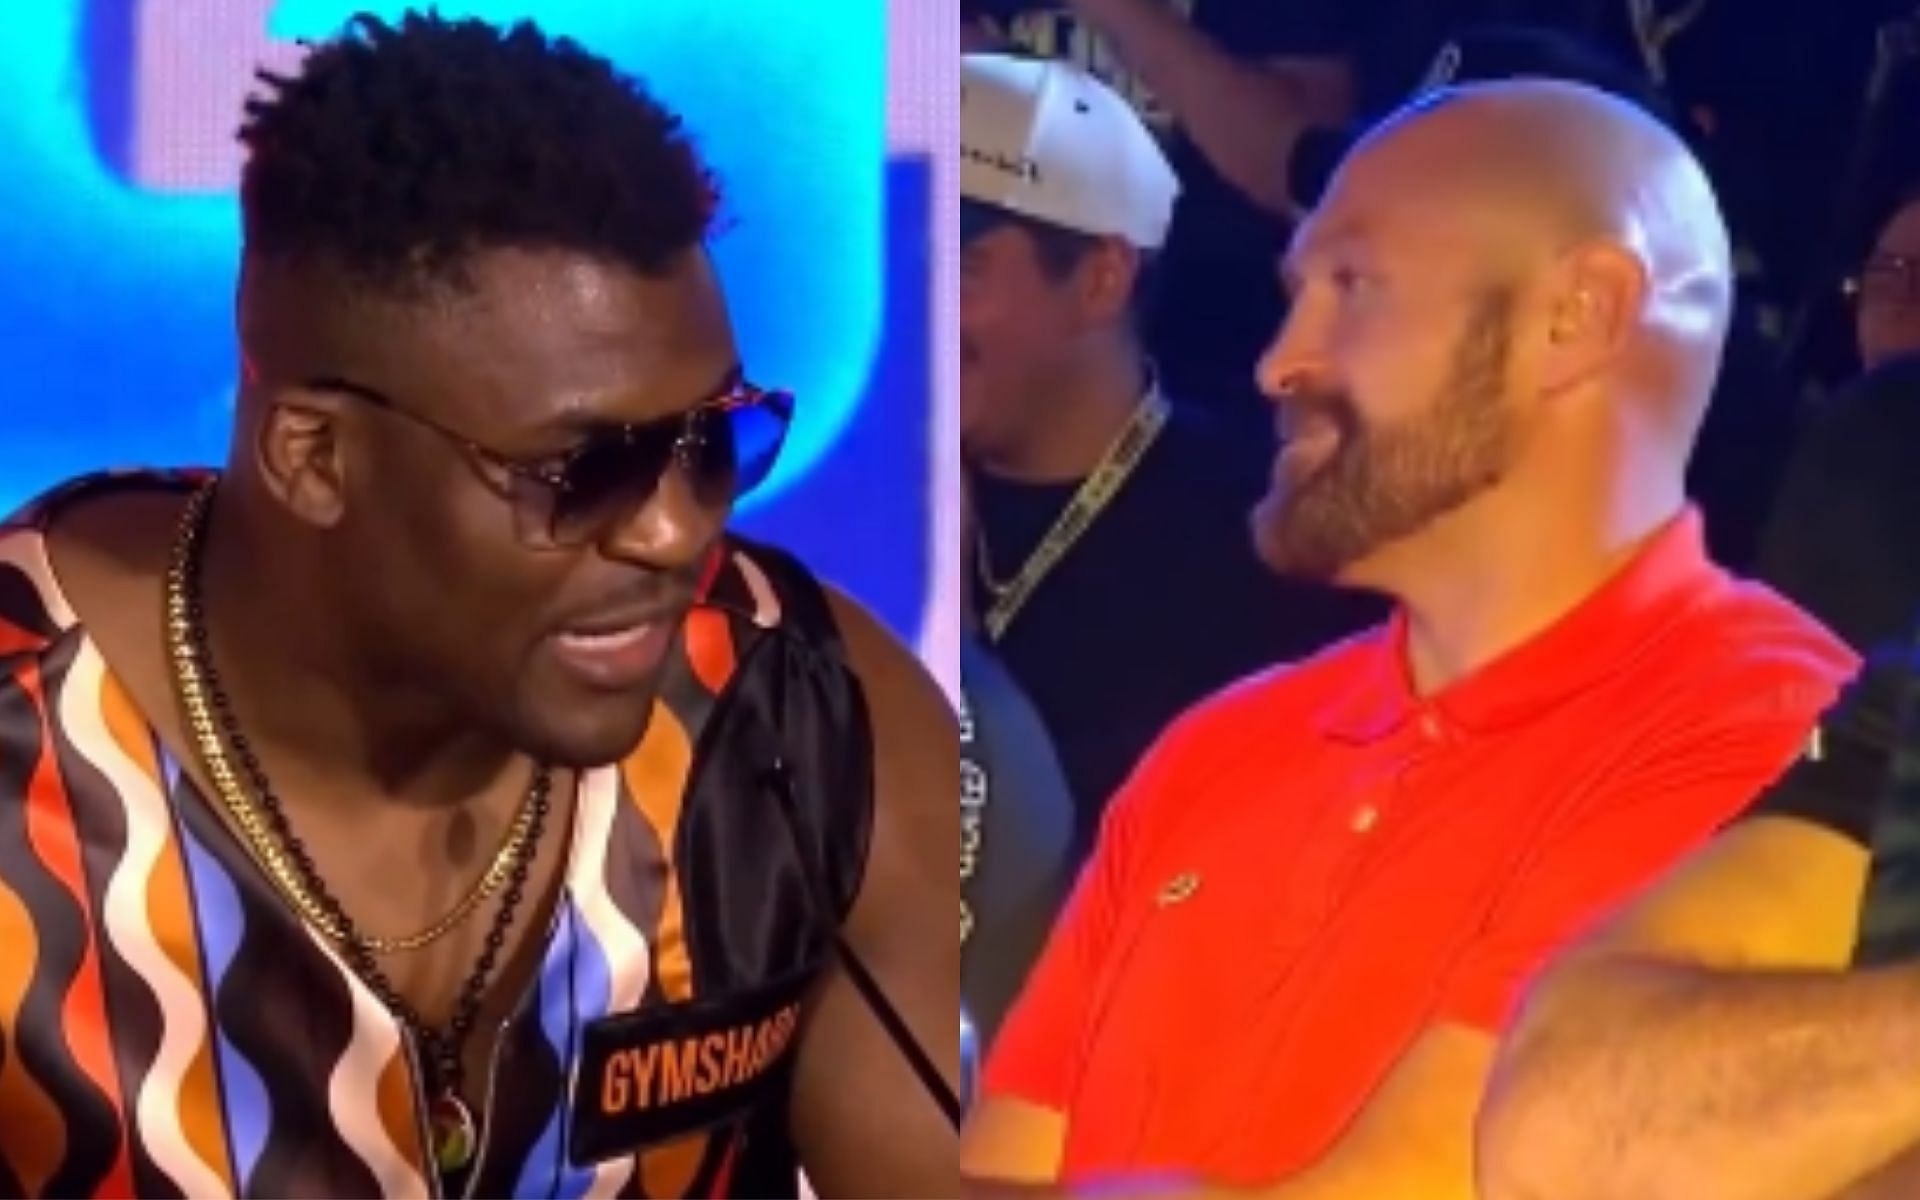 Francis Ngannou snaps at Tyson Fury during heated back-and-forth at press conference [Image courtesy: @HappyPunch - X]